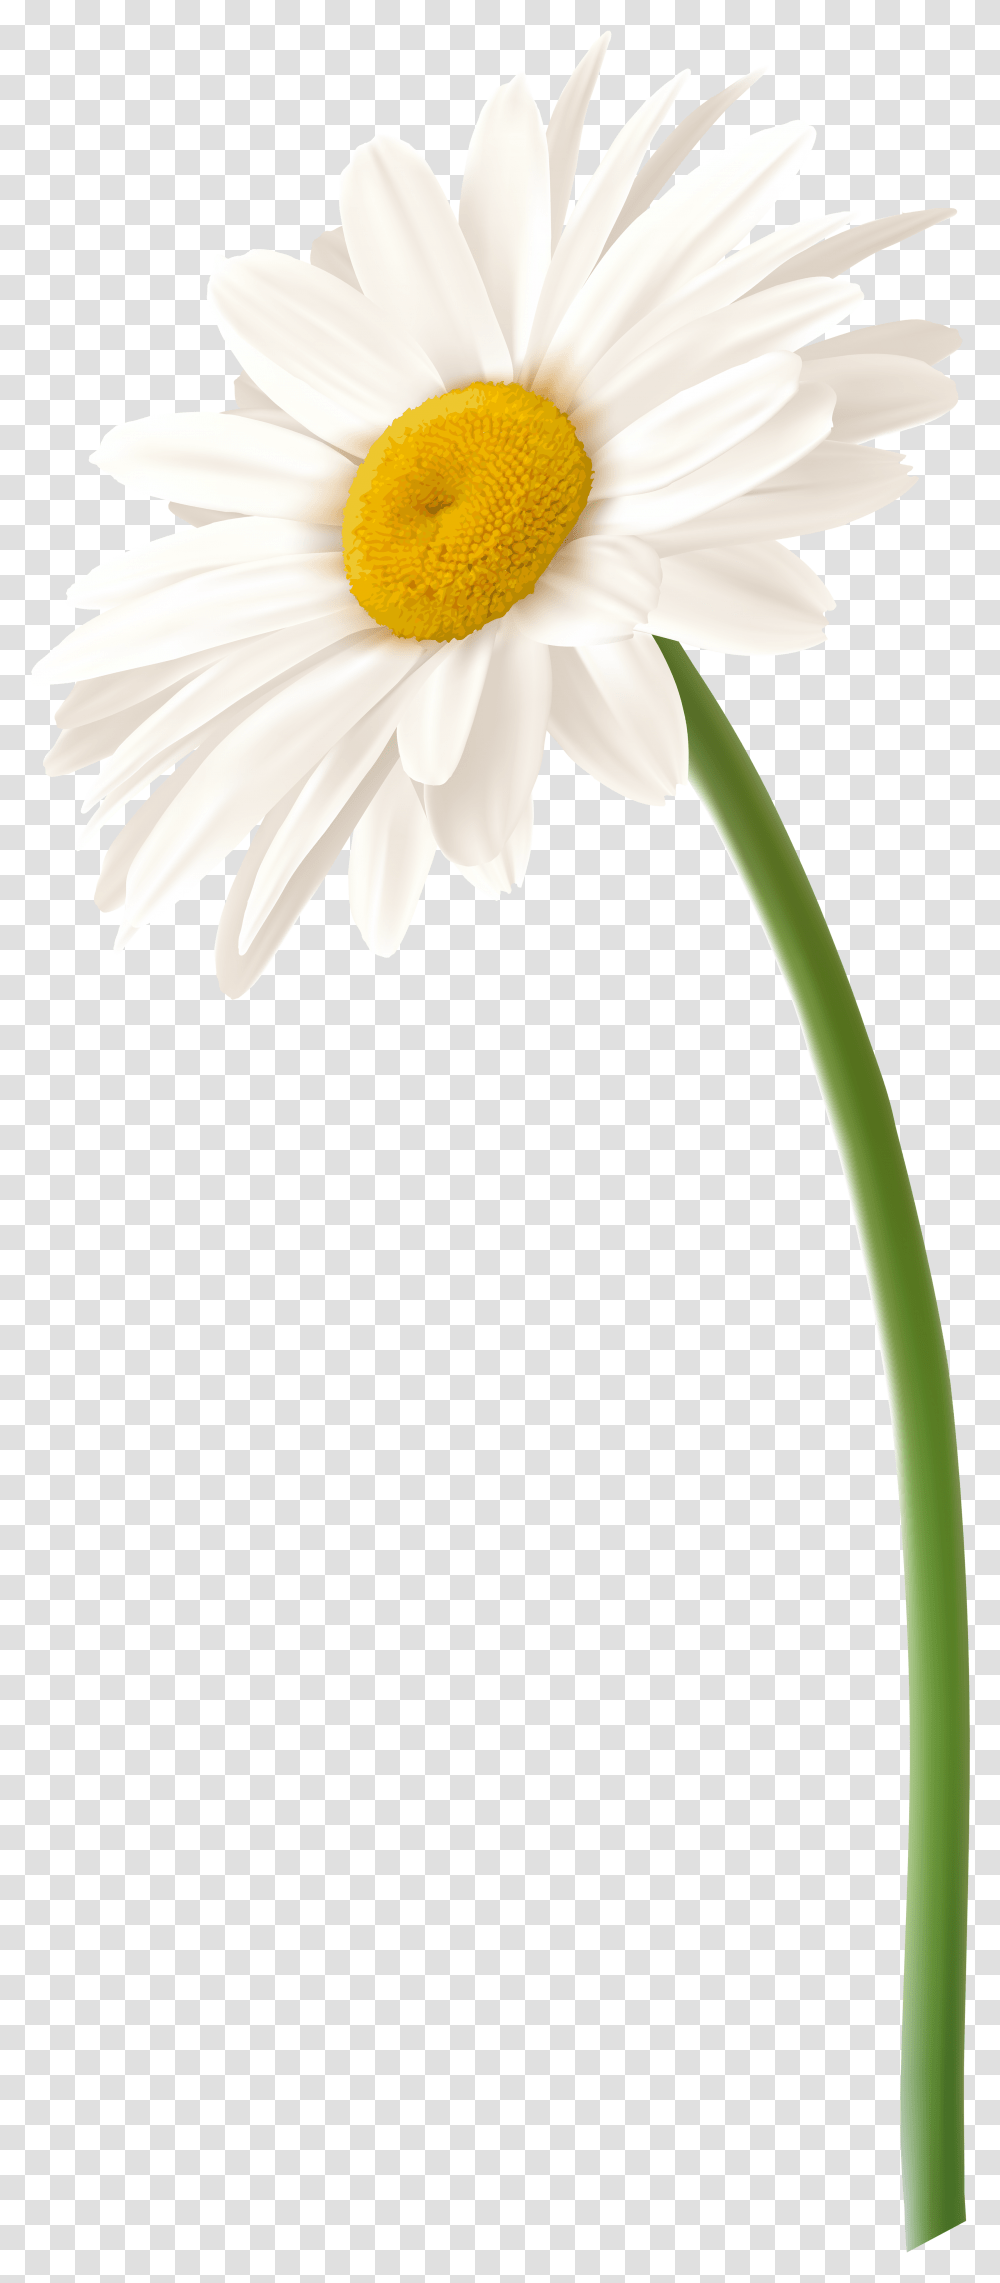 Library Of Flower Daisy Clip Free Files White Gerbera Daisy, Plant, Blossom, Daisies, Animal Transparent Png